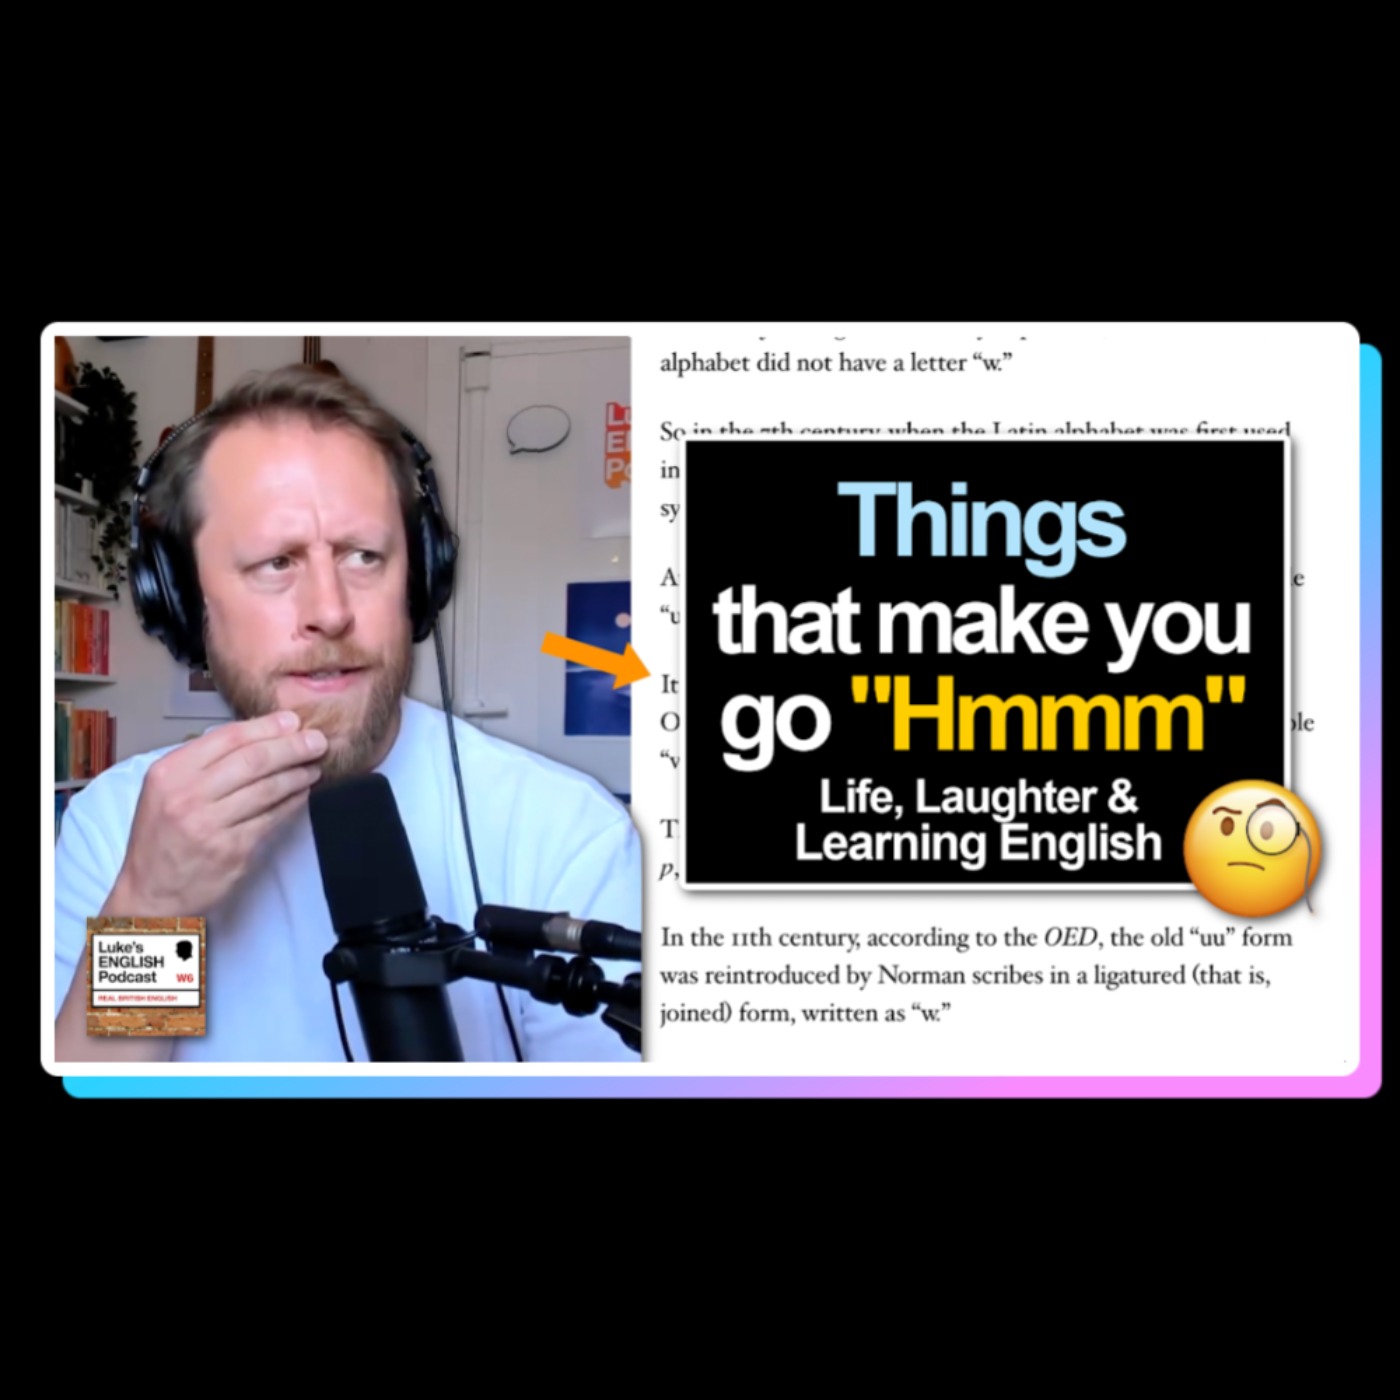 840. Things that make you go "Hmmm" 🤔😅 Life, Laughter & Learning English